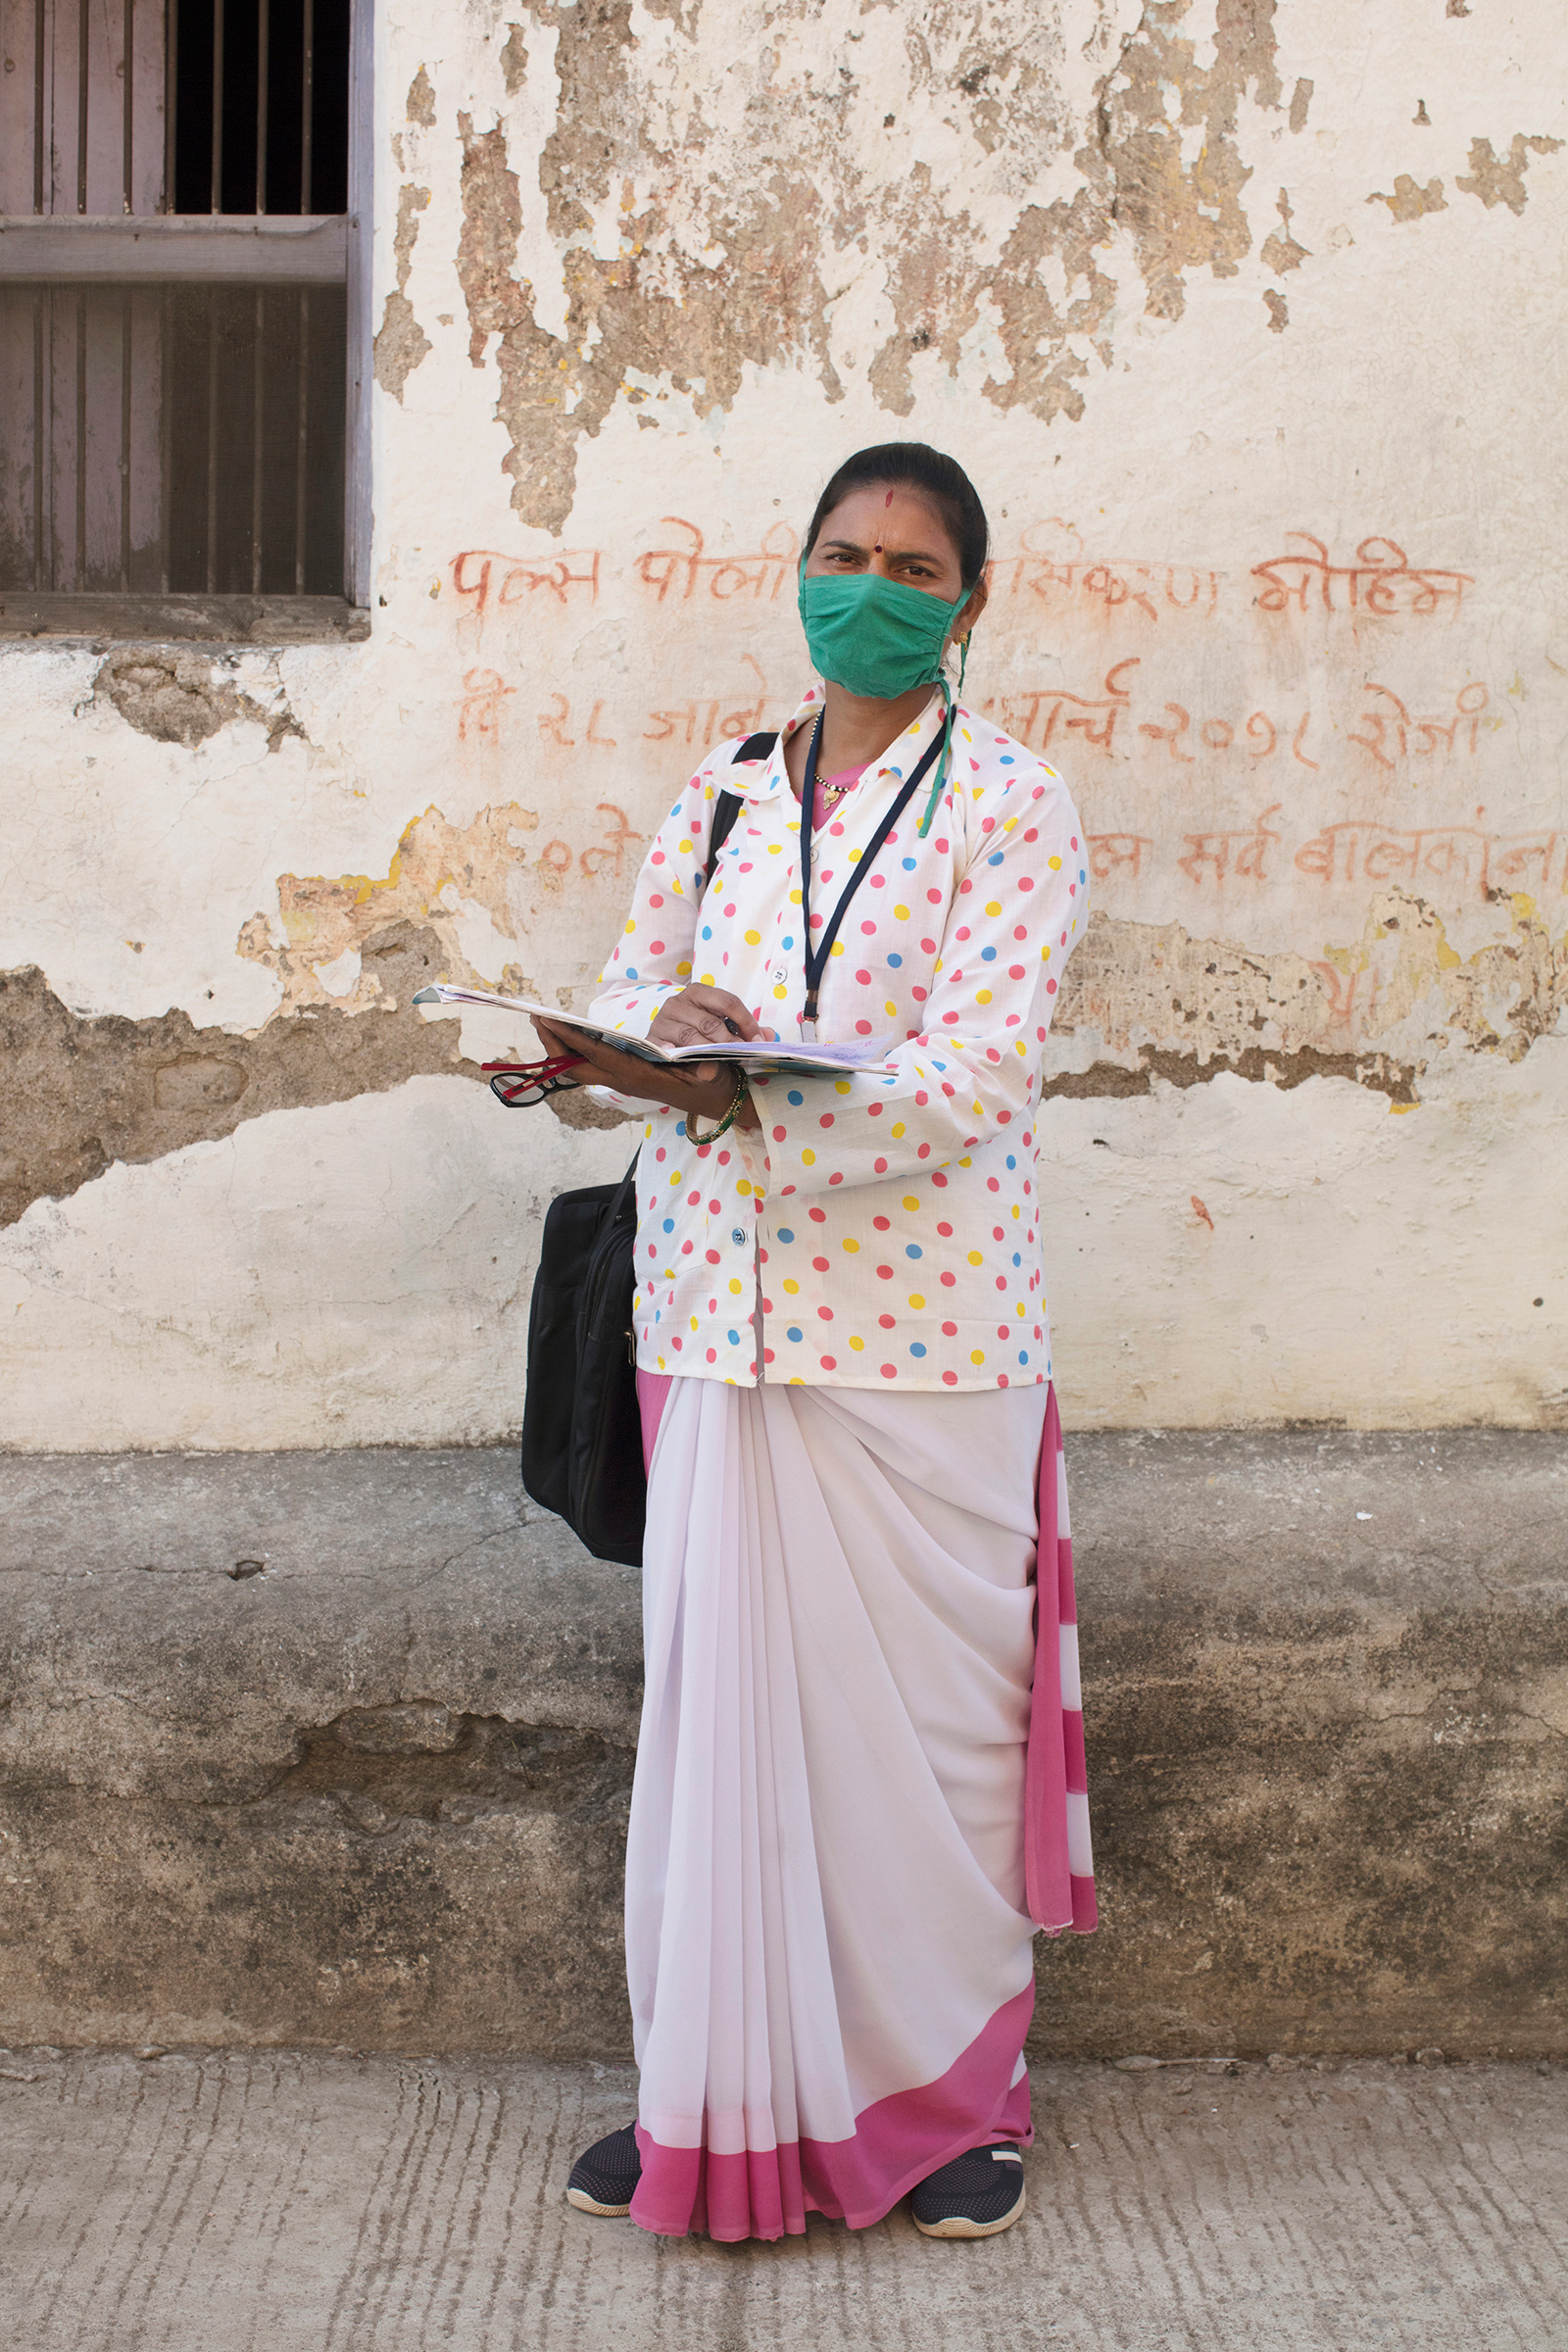 Portrait of Archana Ghugare, a community health worker, in Pavnar, Maharashtra, India, on Dec. 1, 2020. In the background is a message encouraging people to bring their children for the Polio vaccine drive. (Prarthna Singh for TIME)